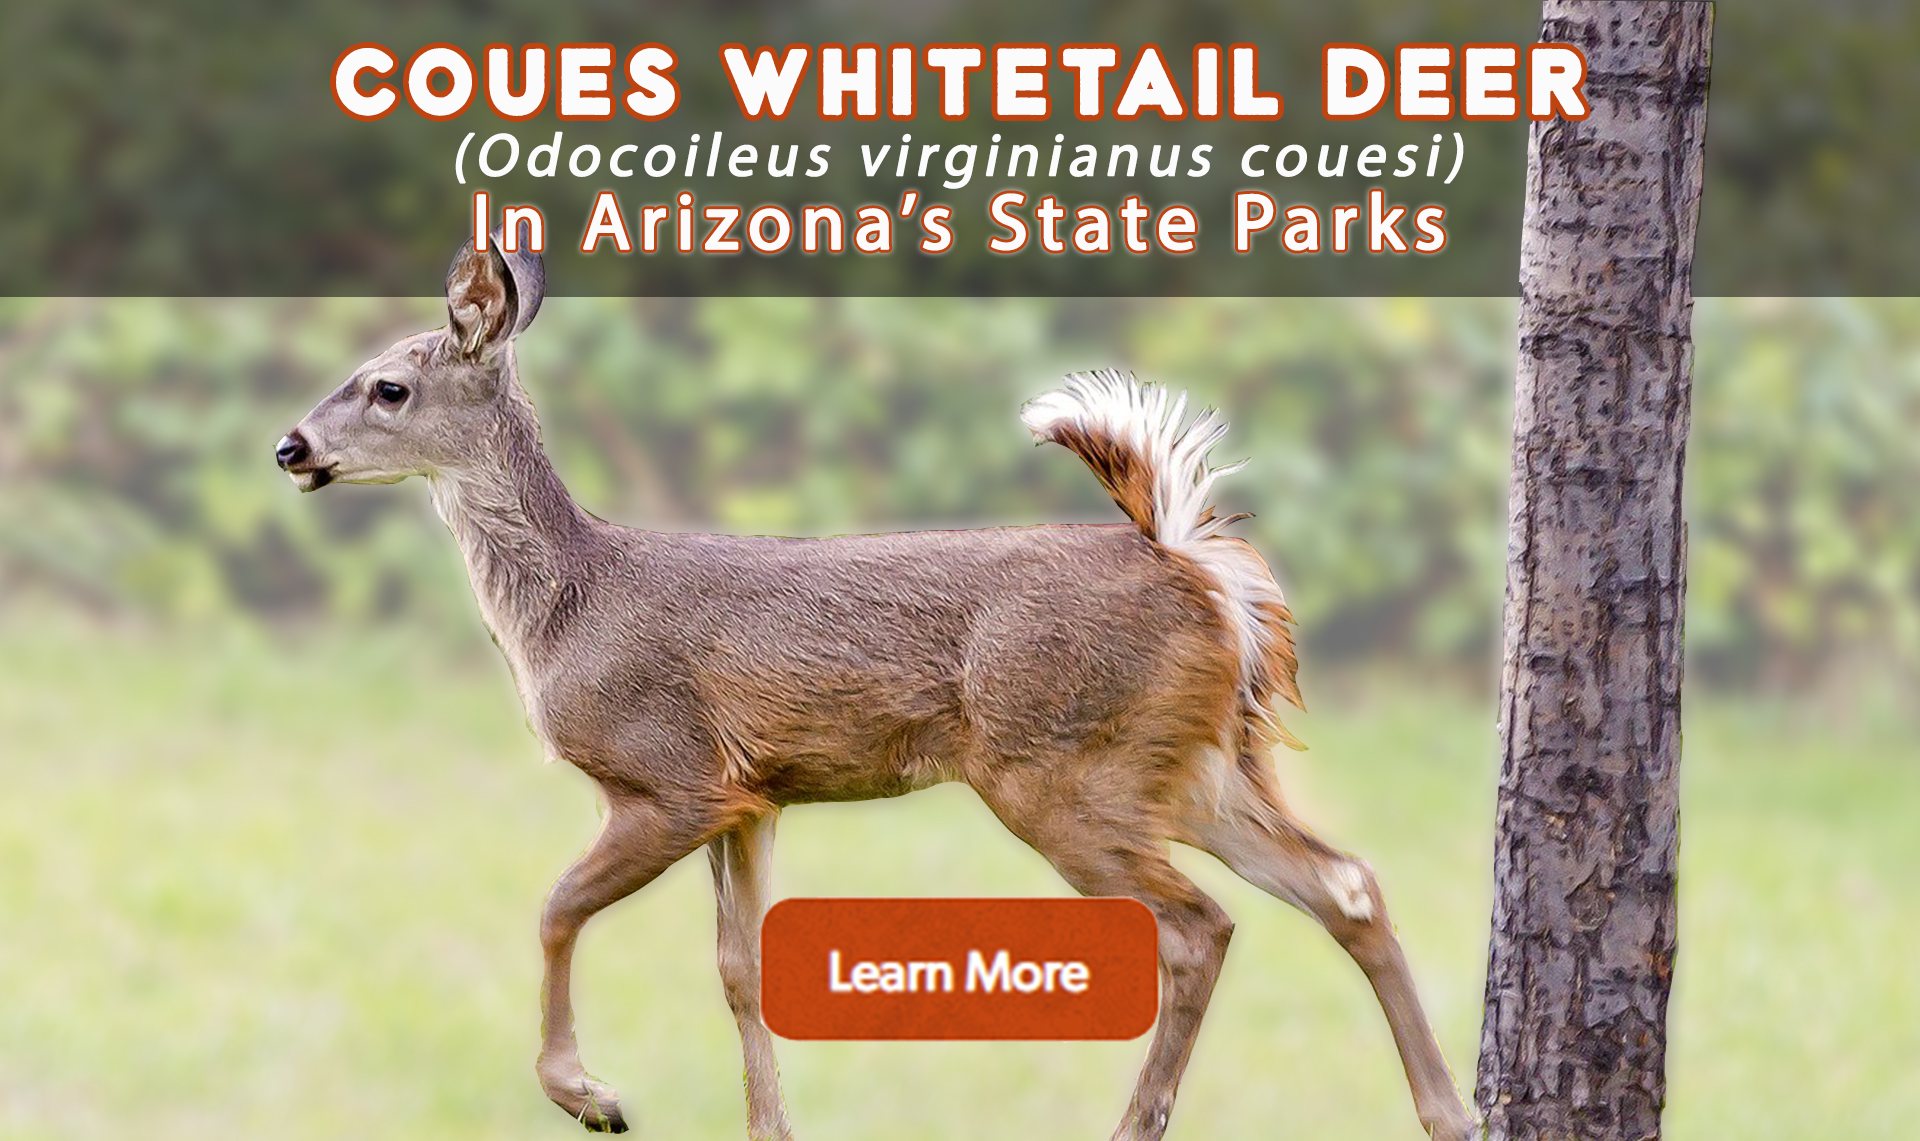 Learn about coues whitetail deer